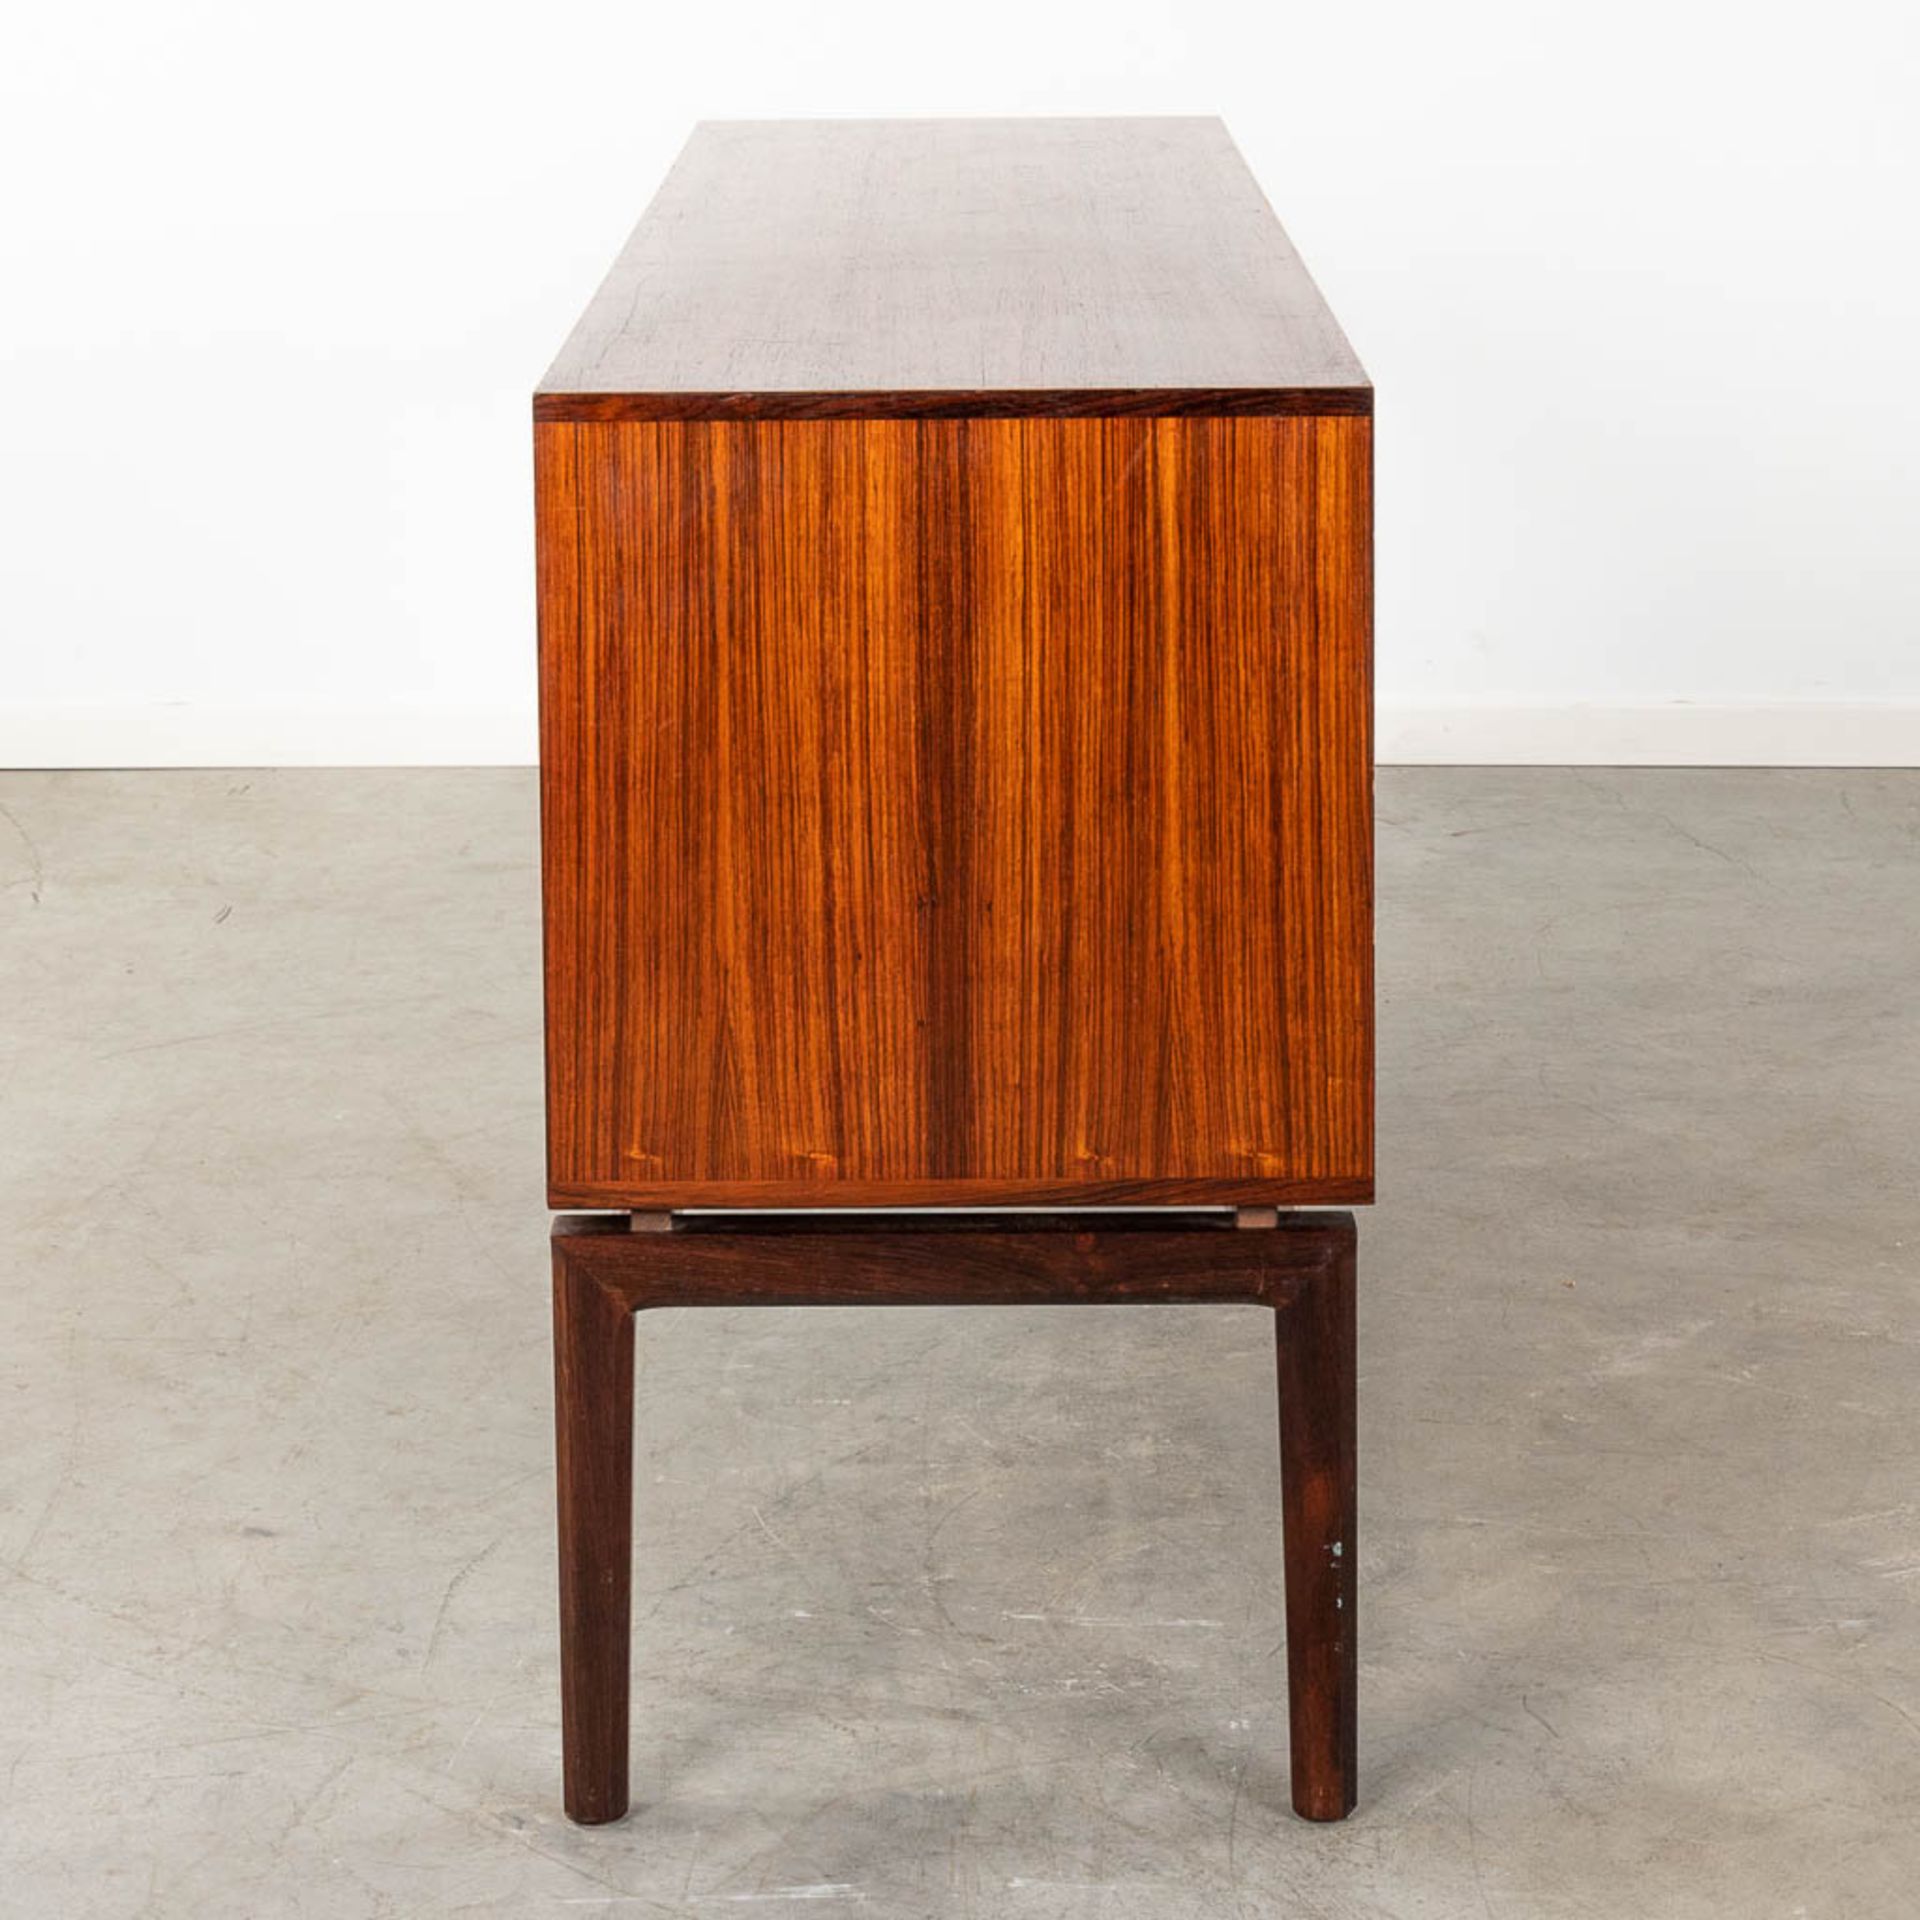 A mid-century Scandinavian Sideboard with 6 drawers, and rosewood veneer. (D:45 x W:150 x H:80 cm) - Image 5 of 12